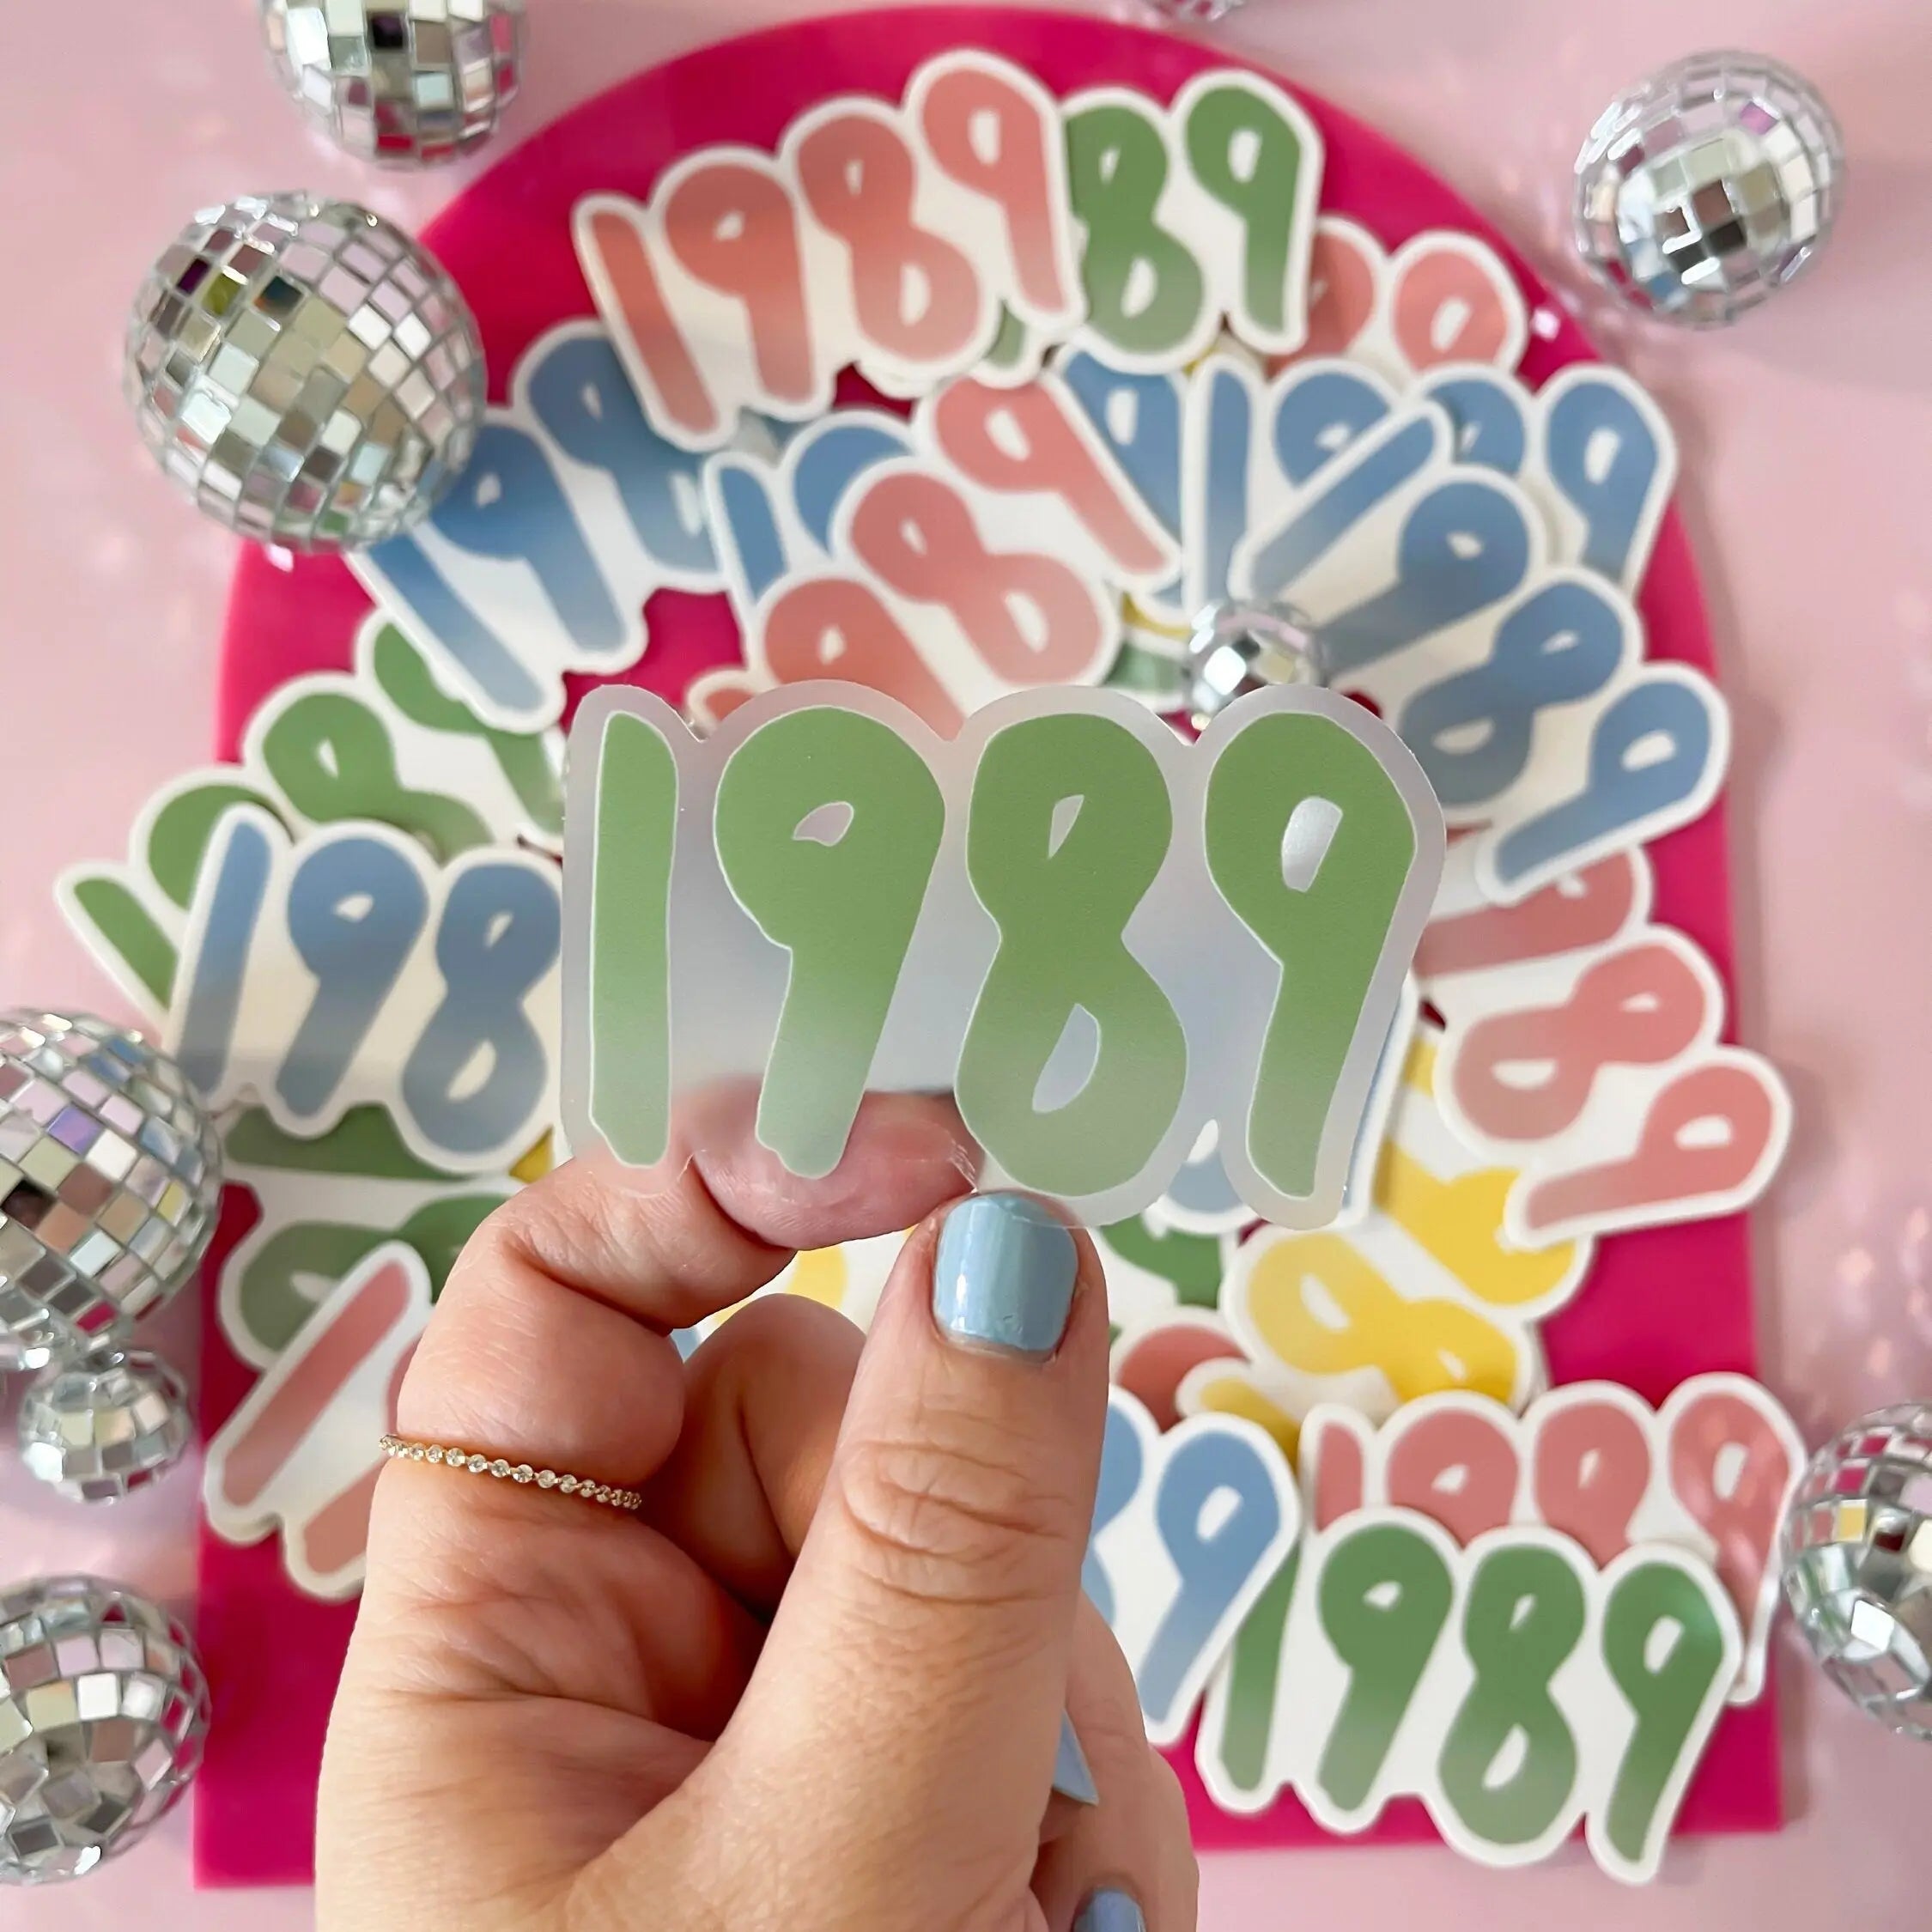 CLEAR 1989 sticker - green MangoIllustrated